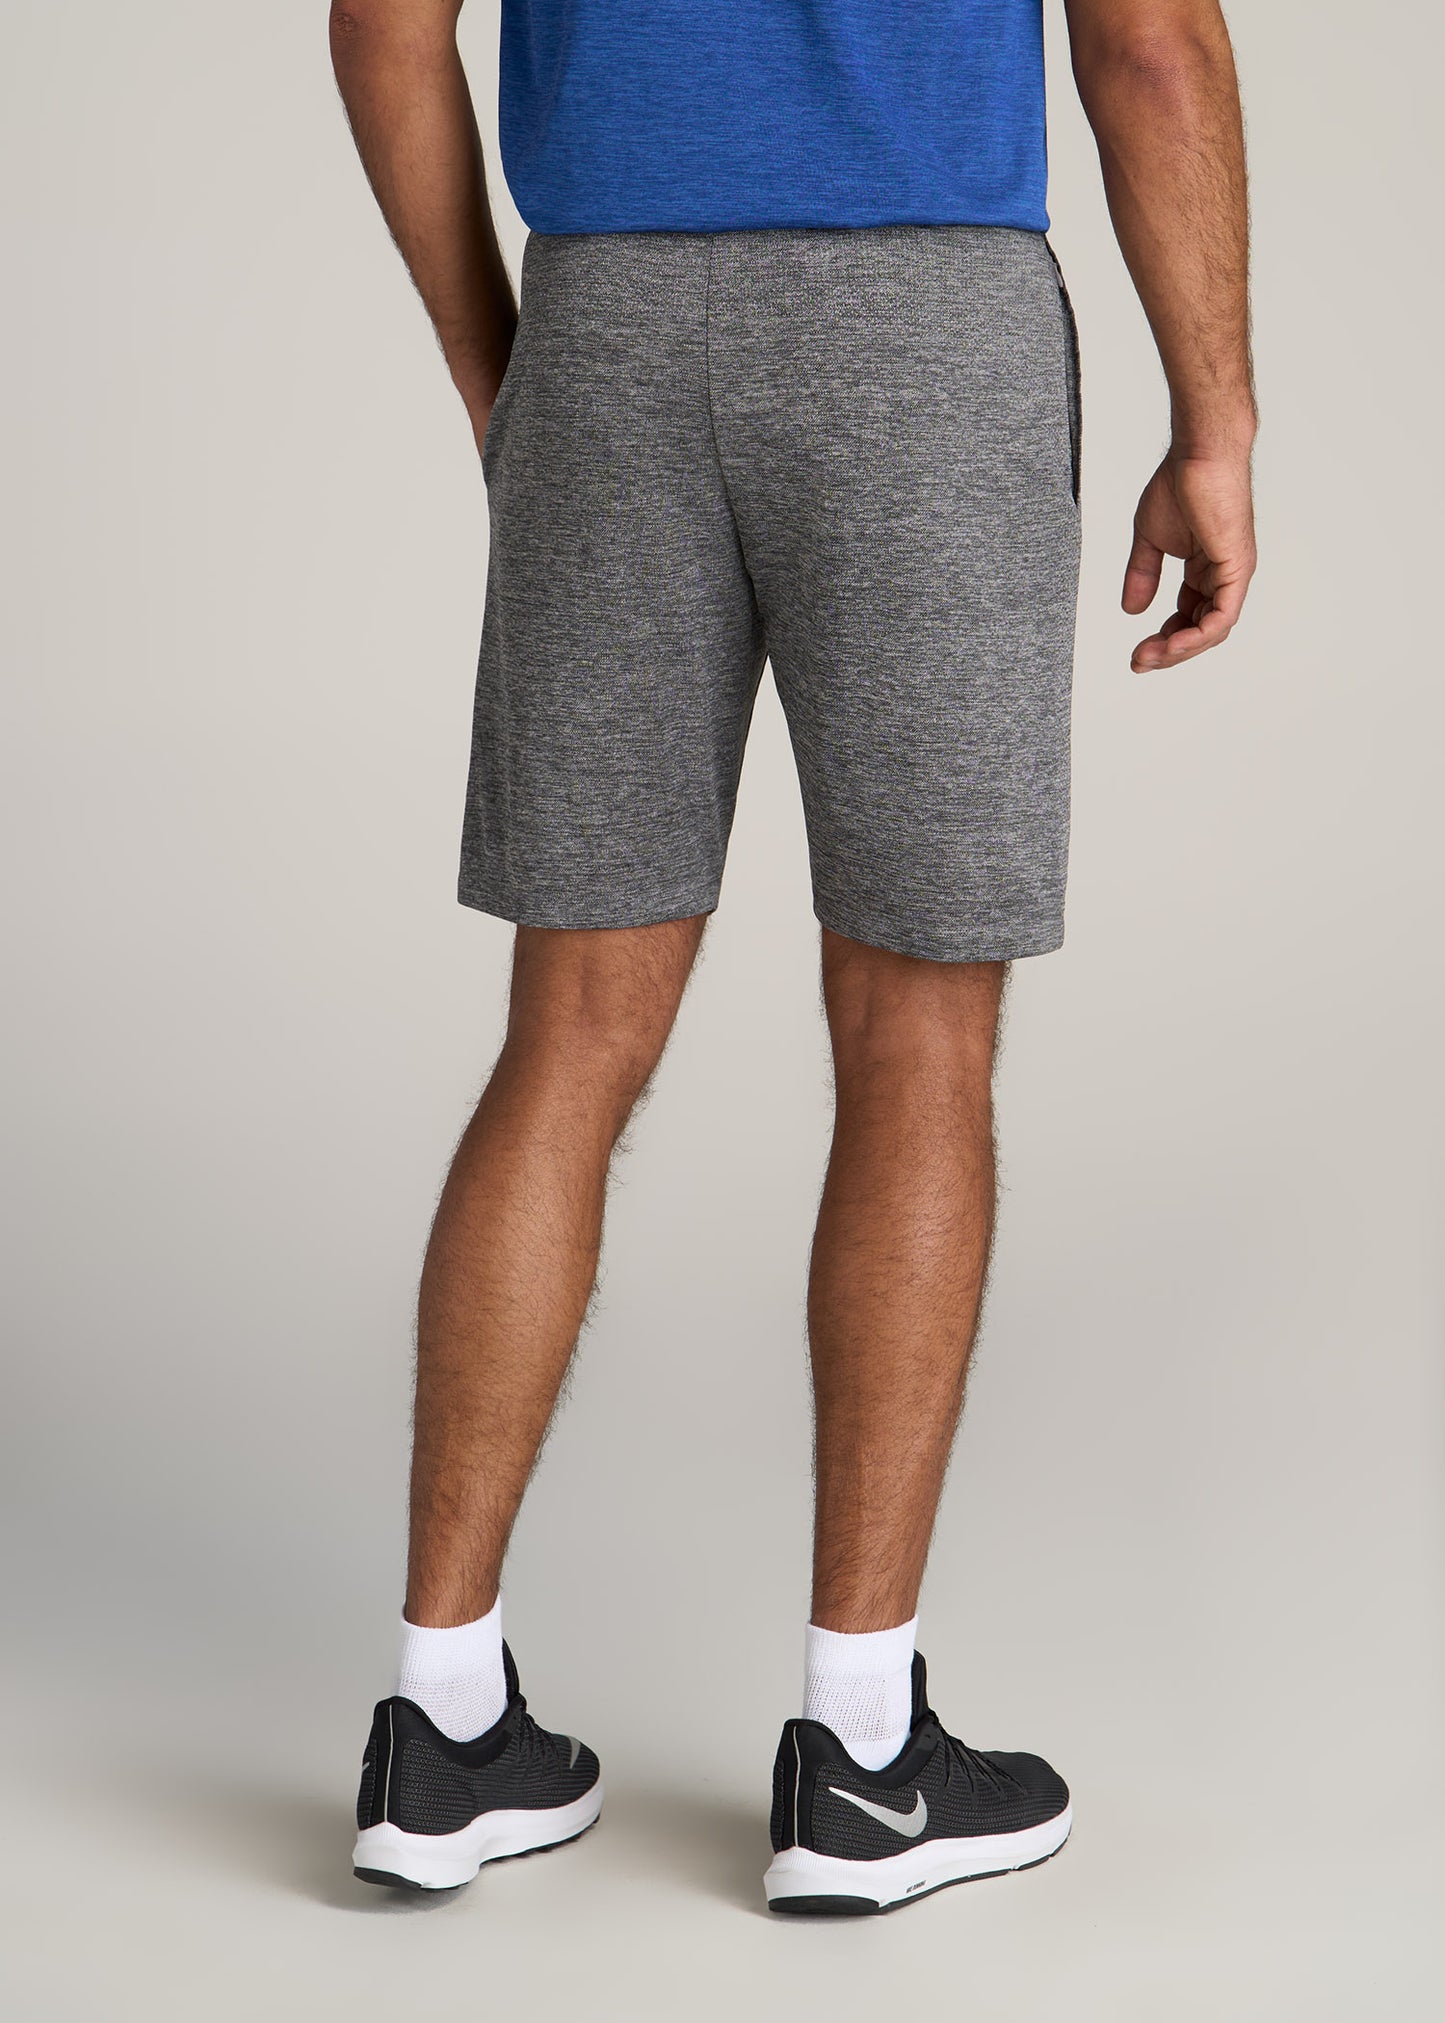 American-Tall-Men-AT-Performance-Engineered-Athletic-Shorts-GreyMix-back